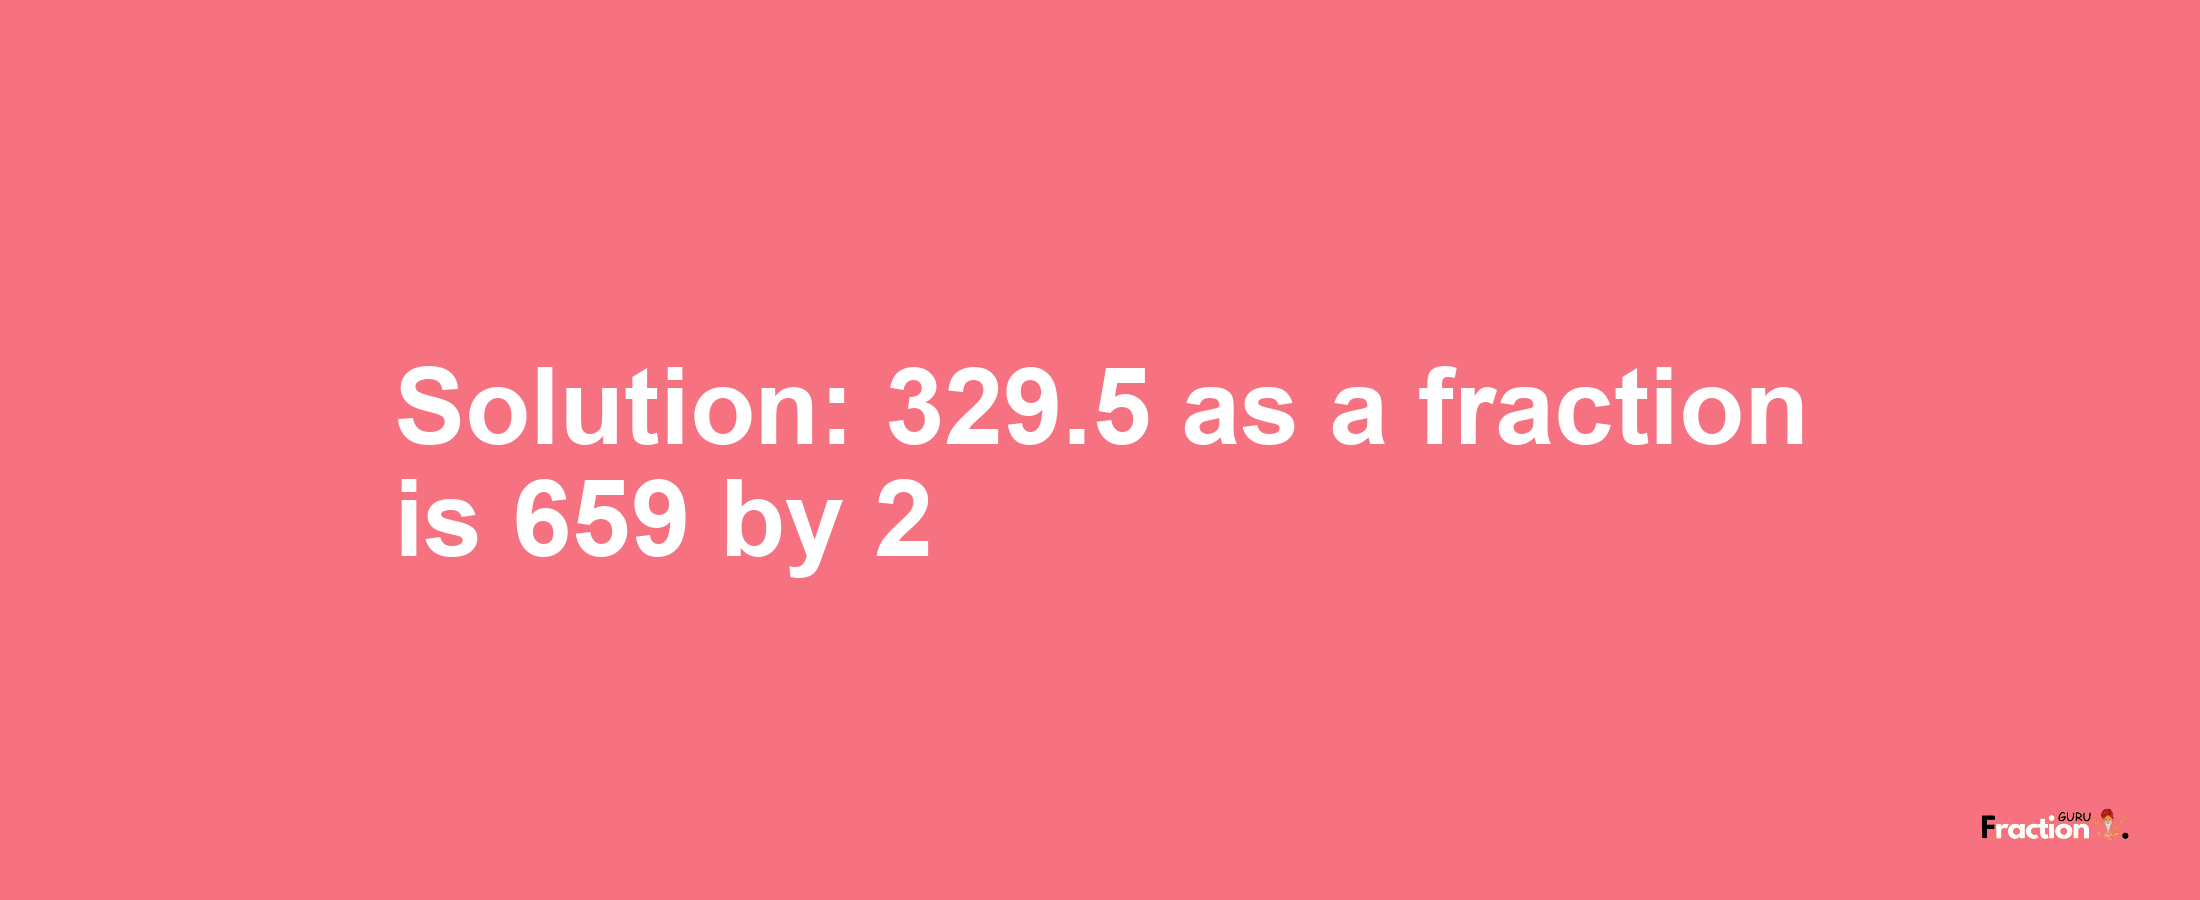 Solution:329.5 as a fraction is 659/2